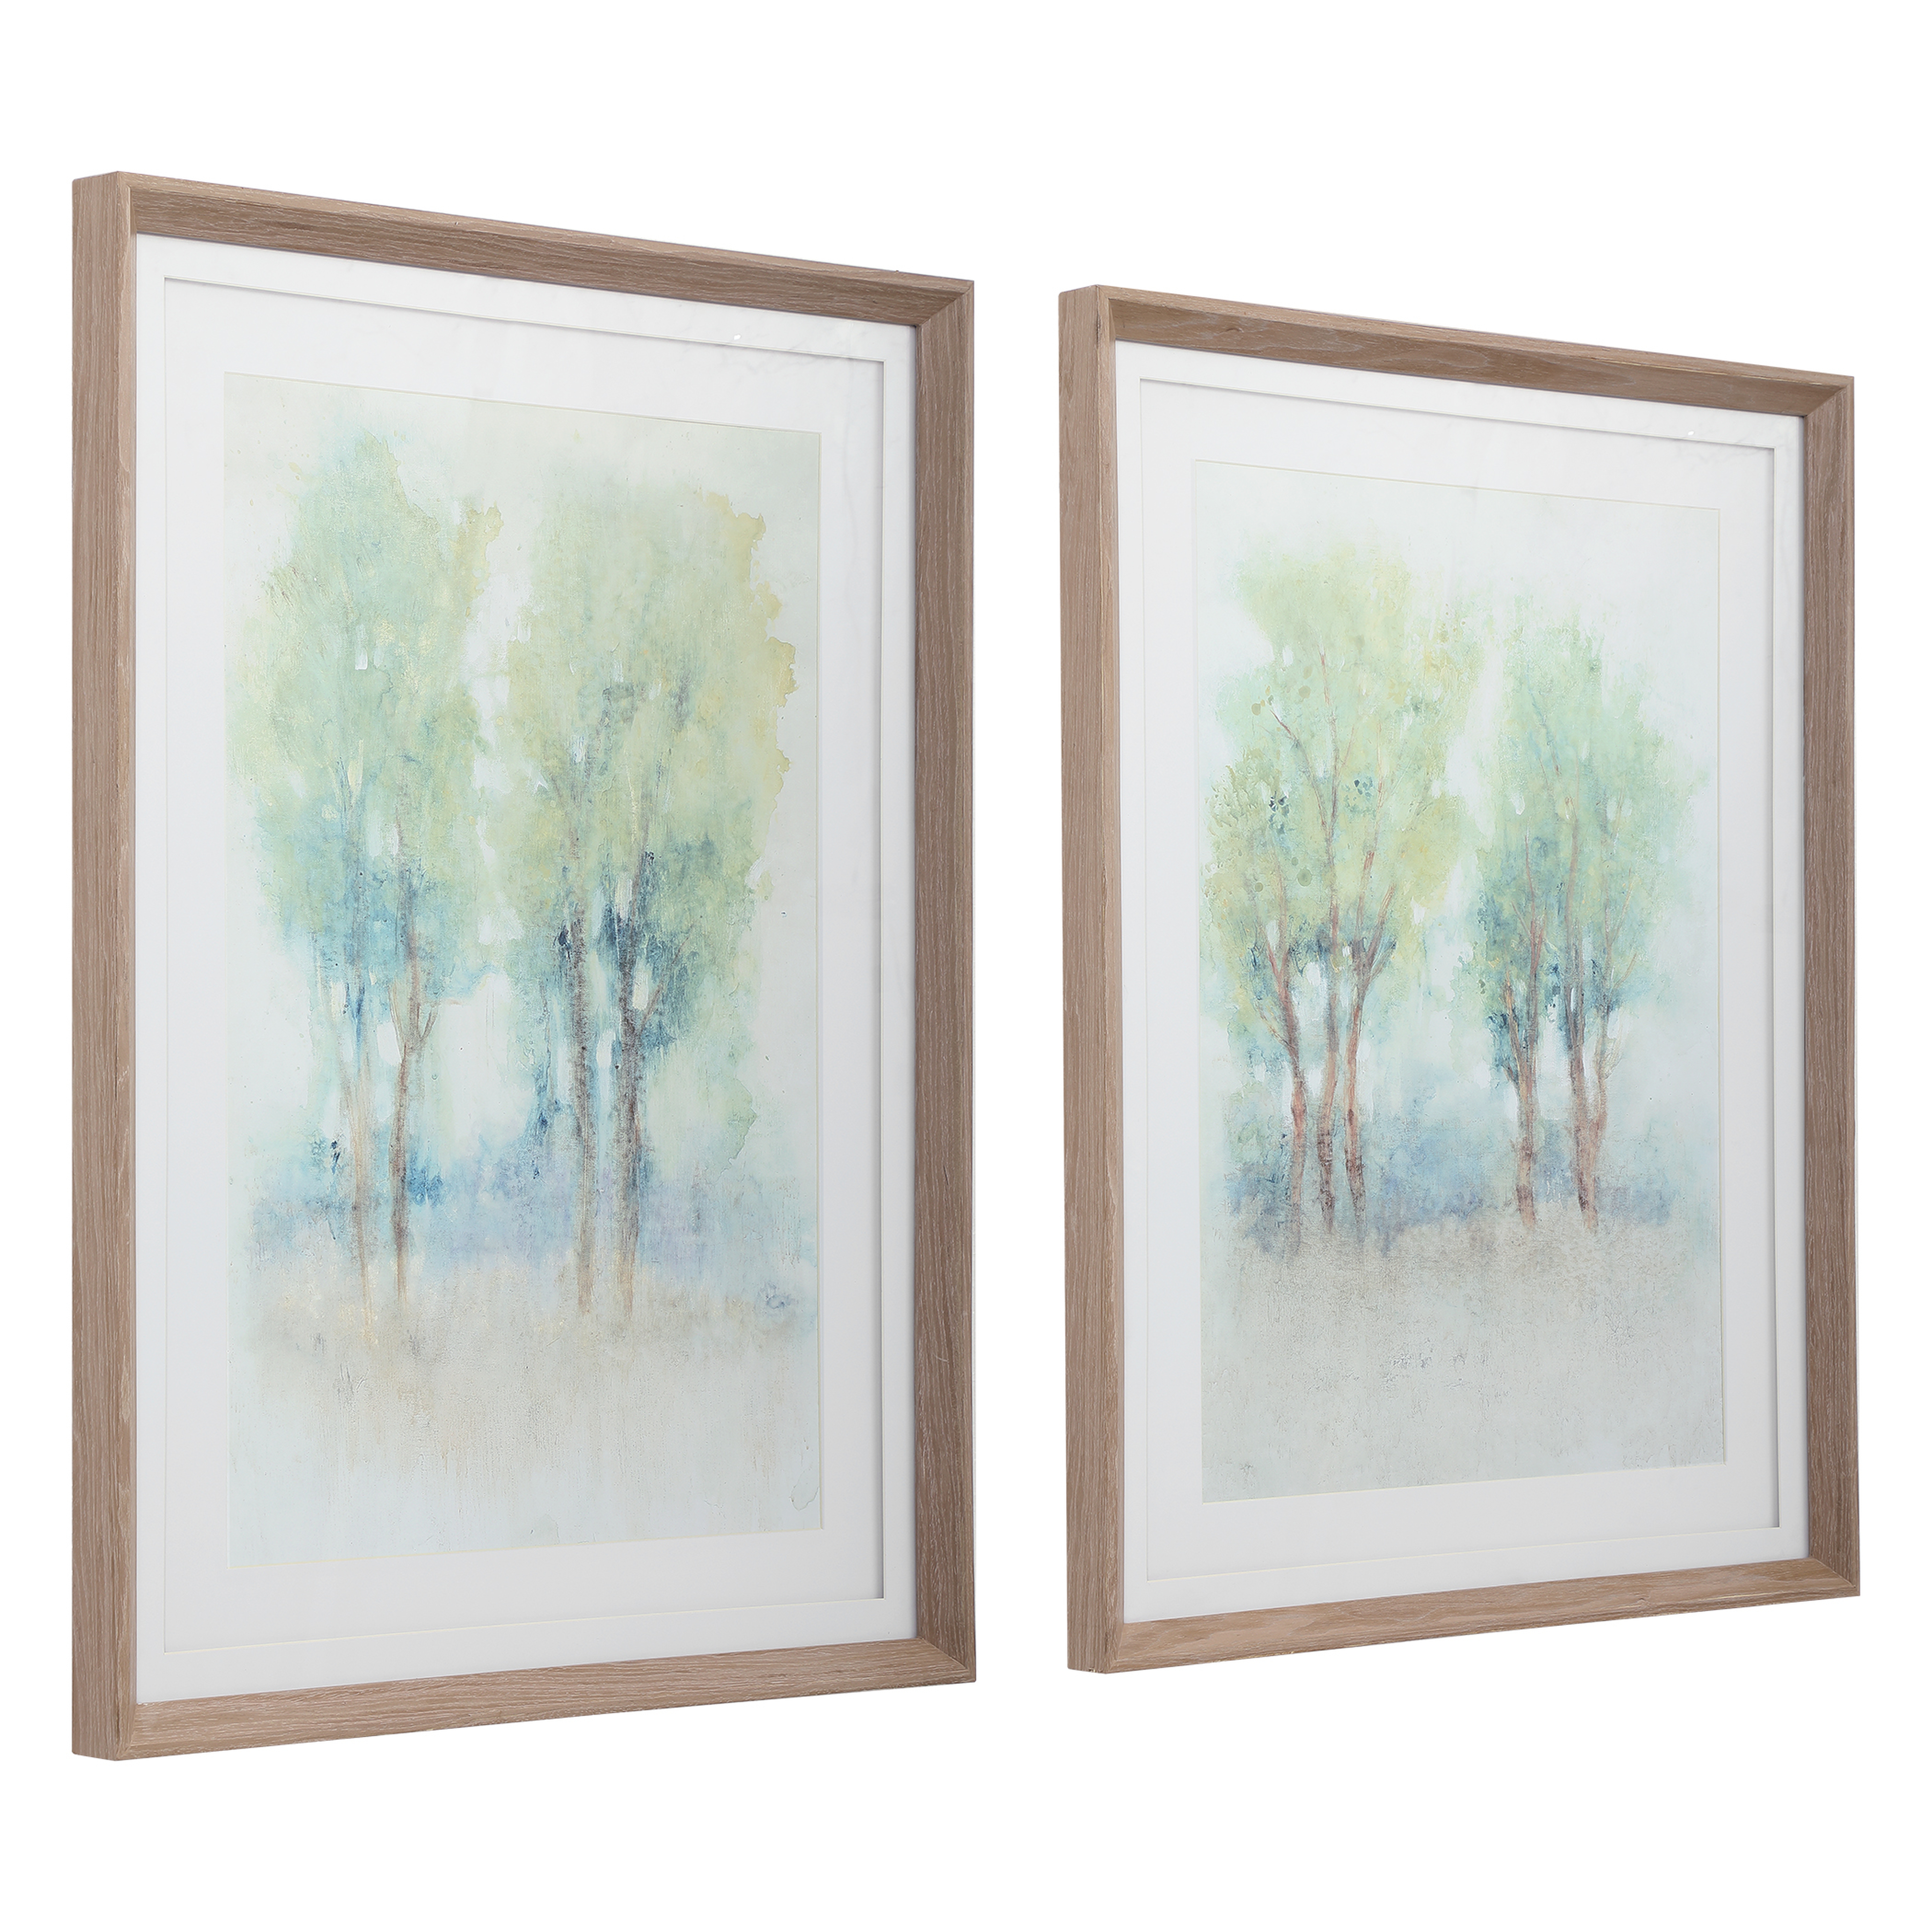 Meadow View Framed Prints, S/2 - Hudsonhill Foundry